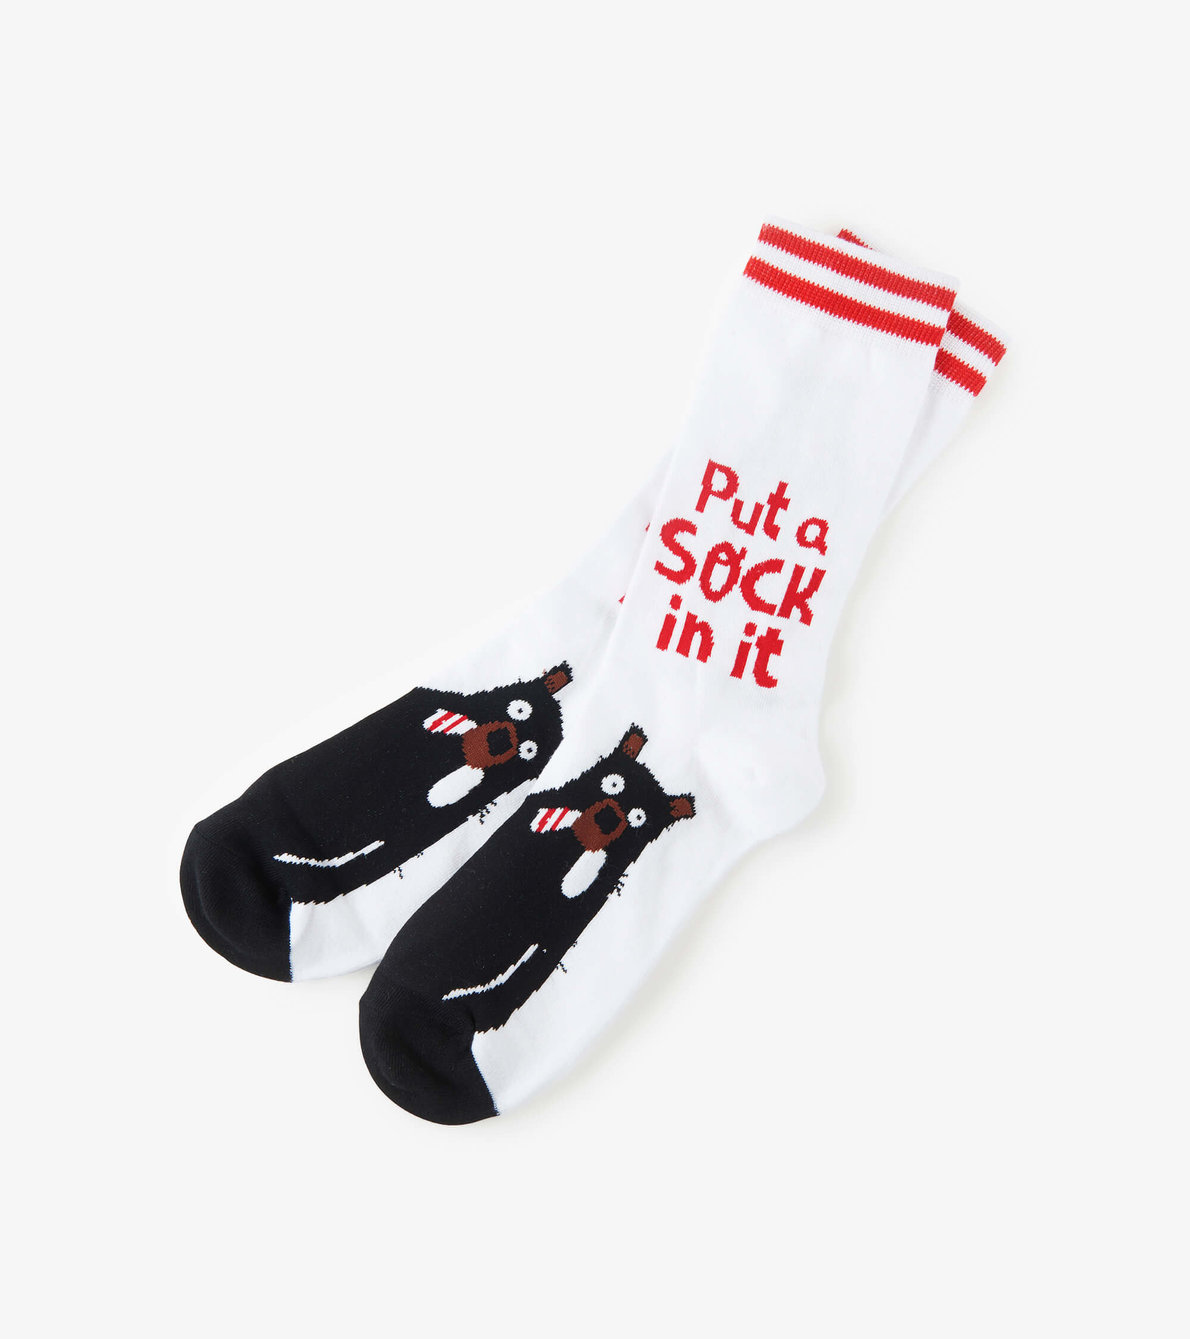 View larger image of Put a Sock in it Men's Crew Socks